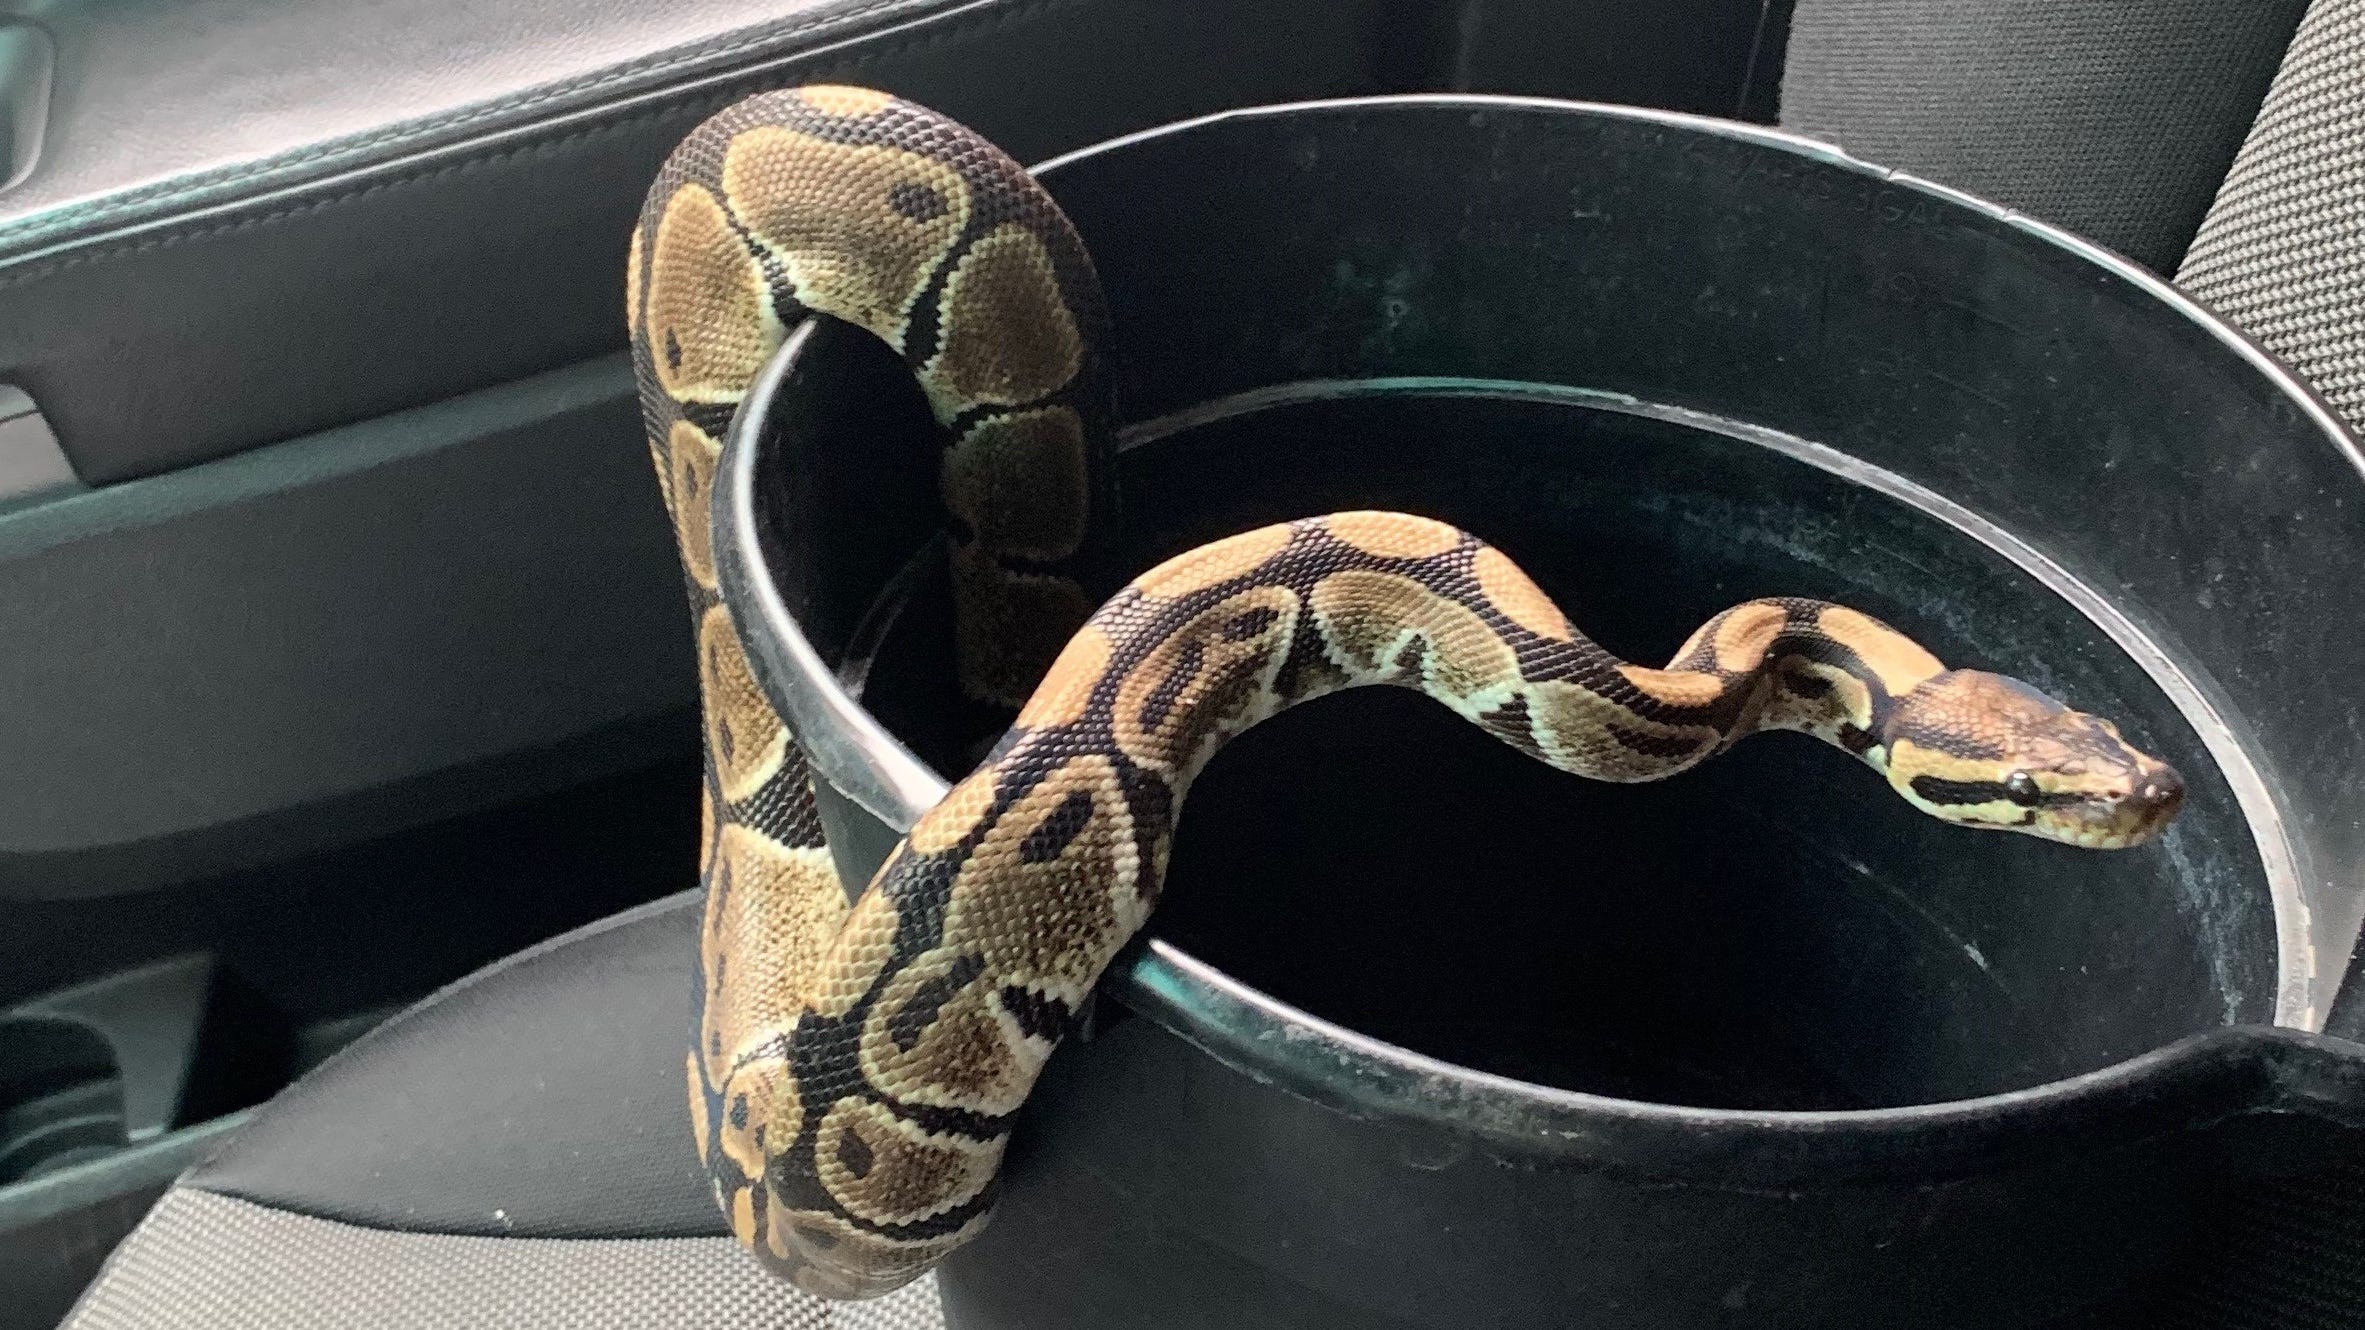 Are Ball Pythons Illegal in Florida?